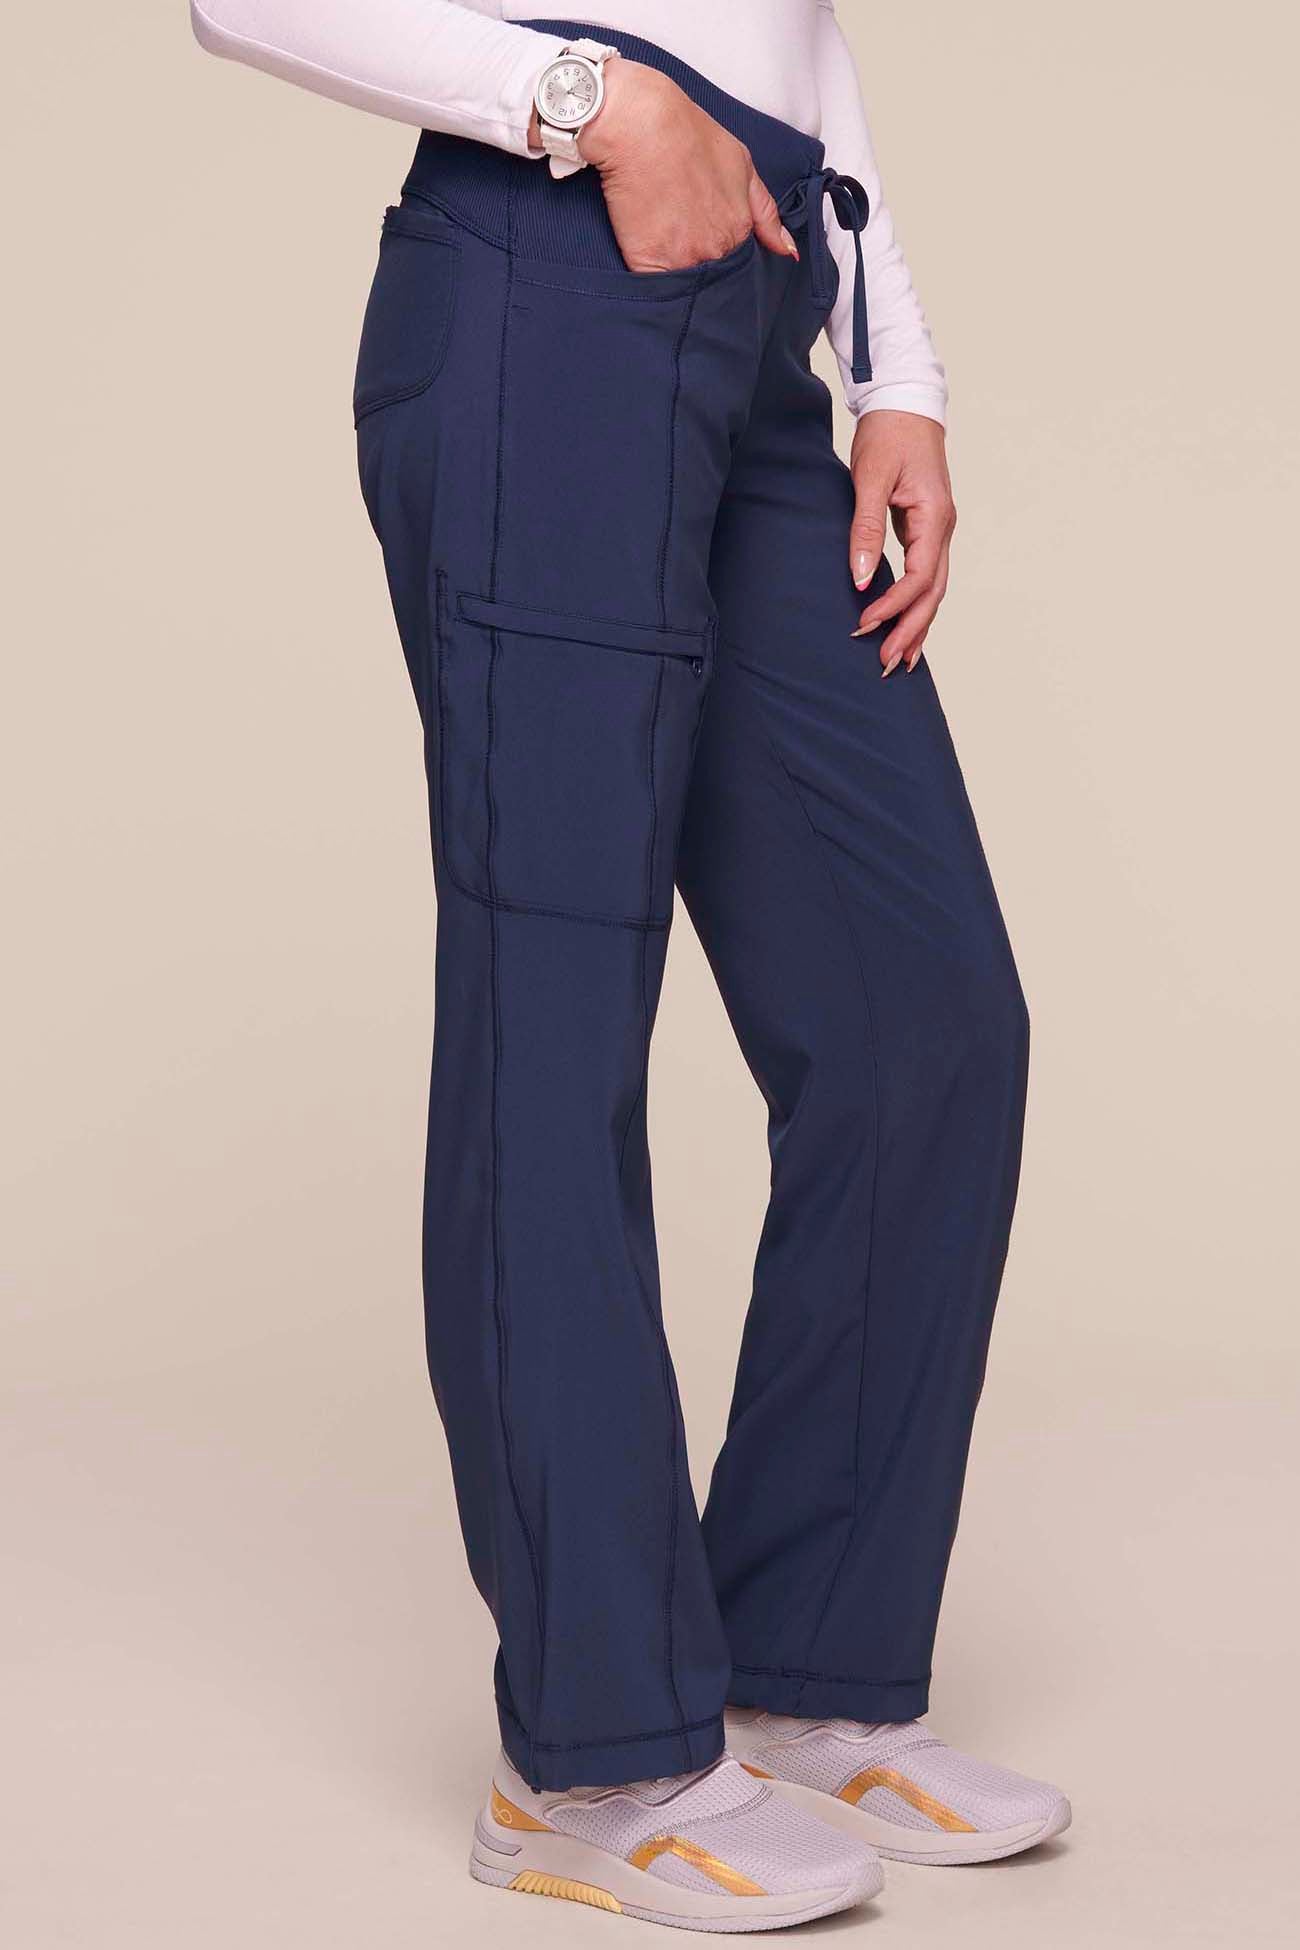 Infinity Scrub pant Navy blue color Side view